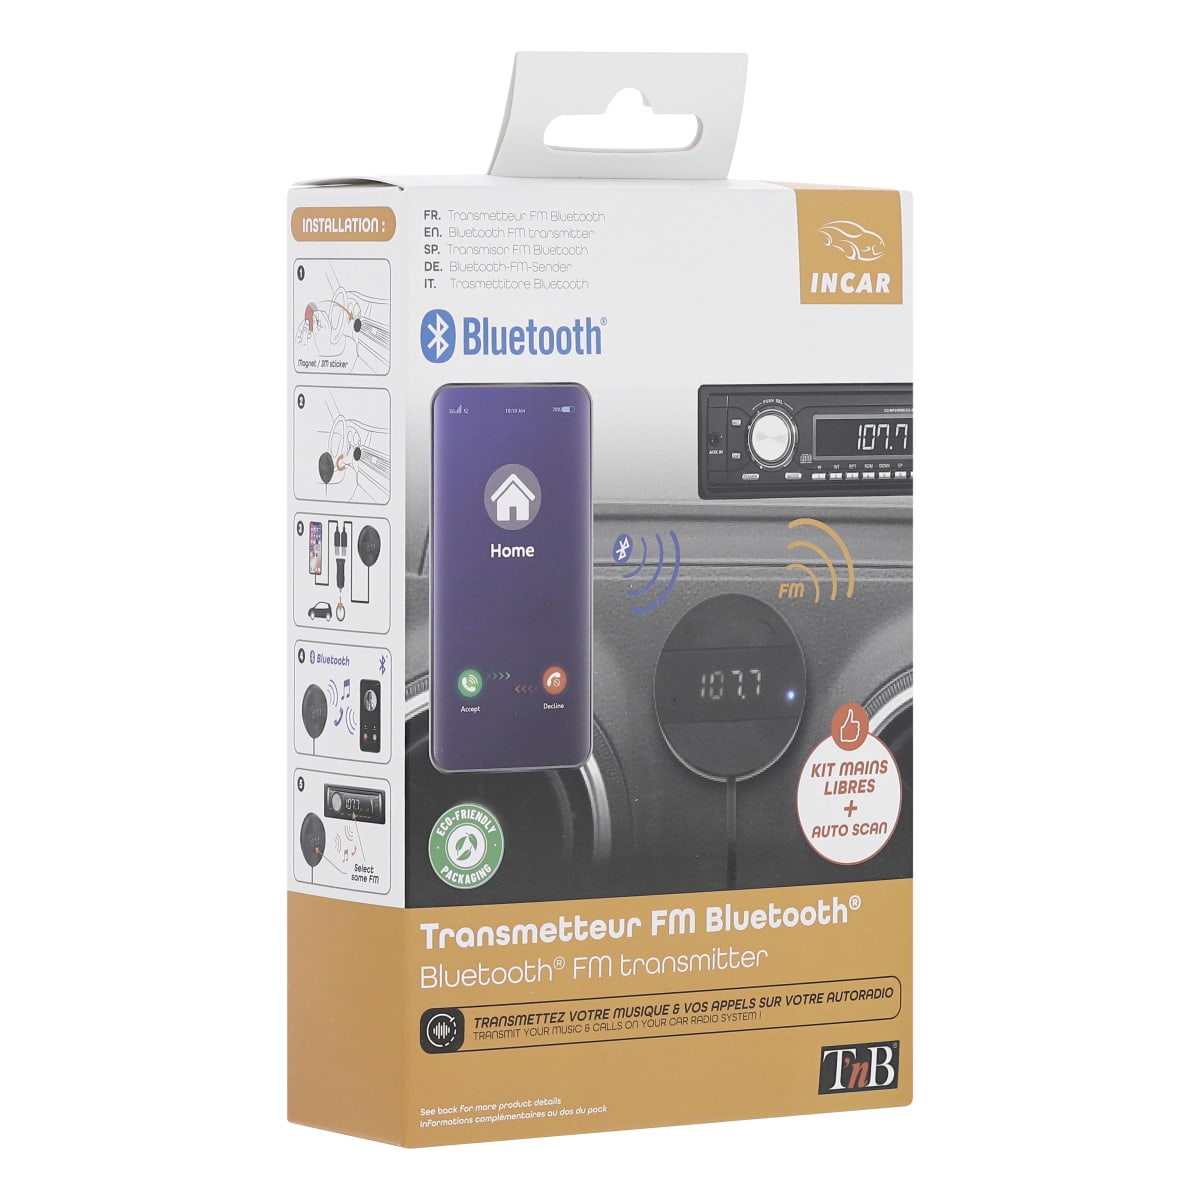 Bluetooth FM transmitter with hands free kit - T'nB